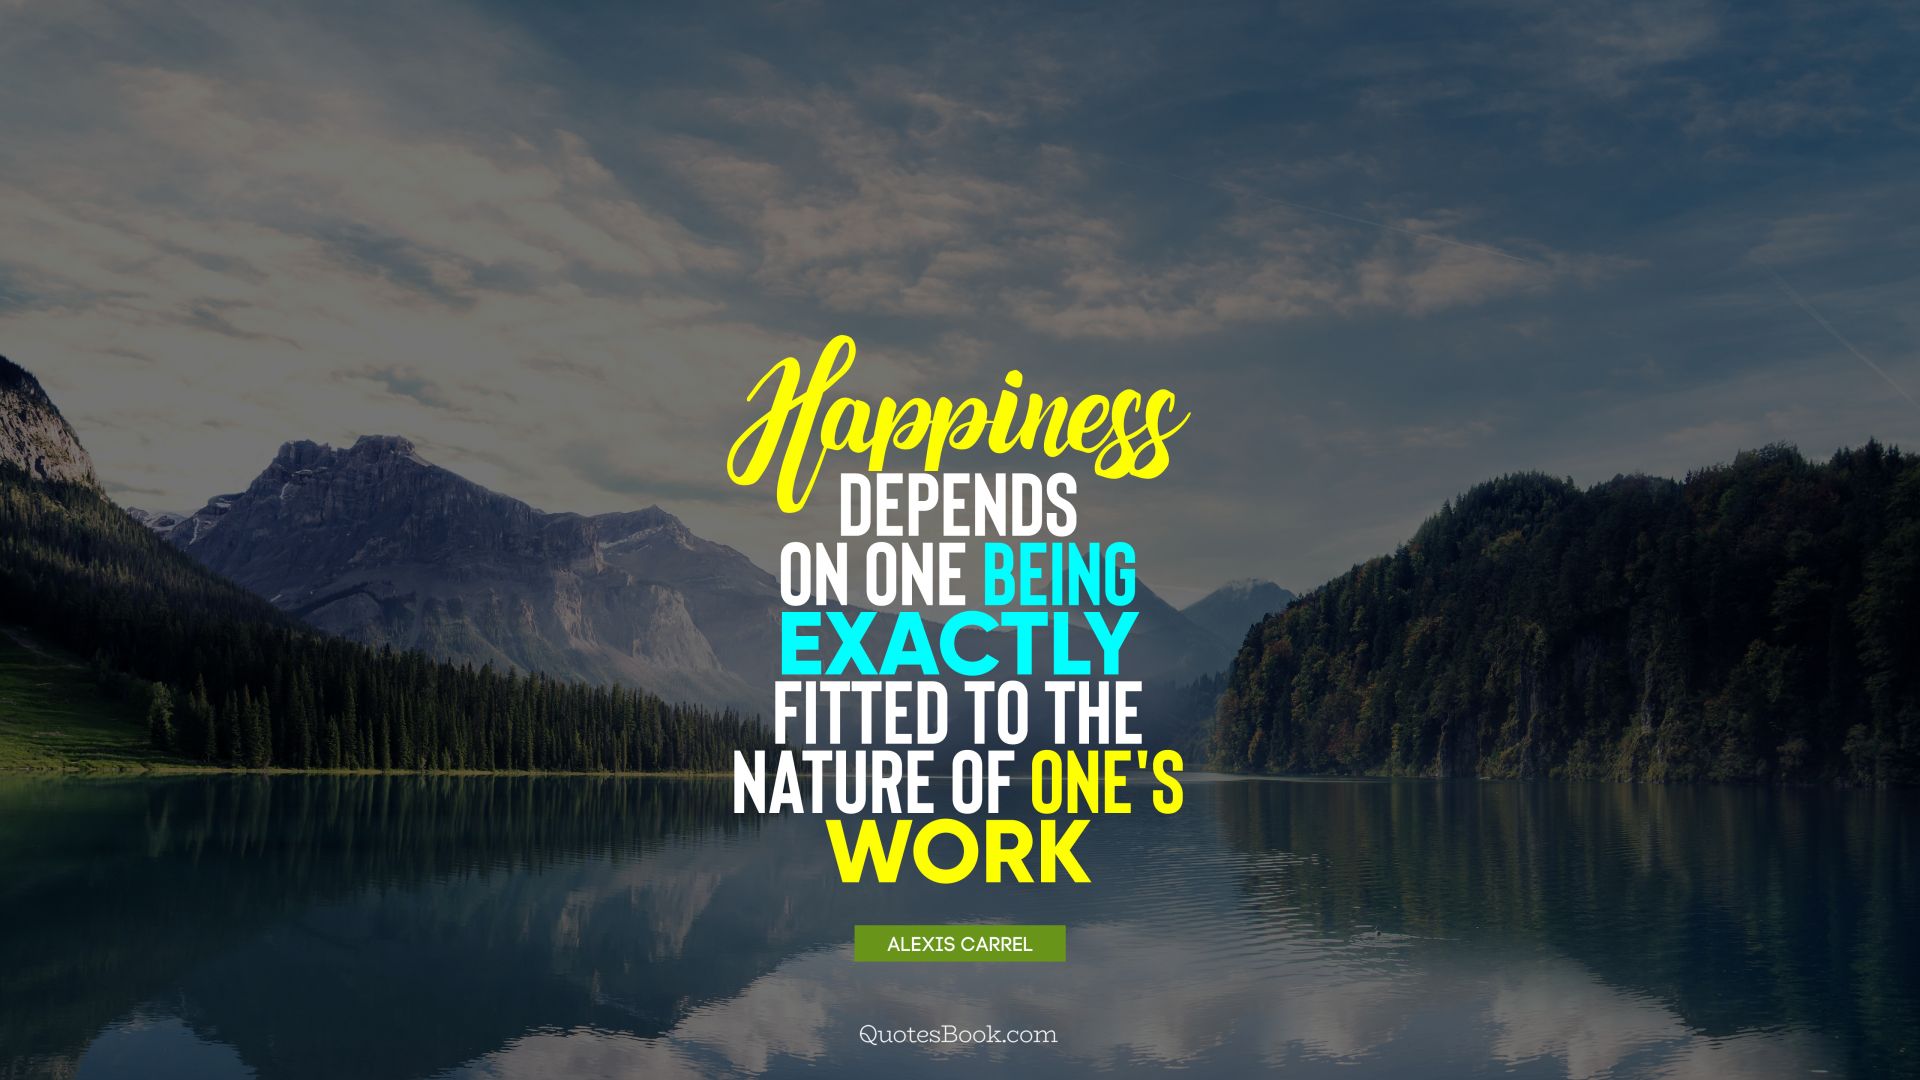 Happiness depends on one being exactly fitted to the nature of one's work. - Quote by Alexis Carrel